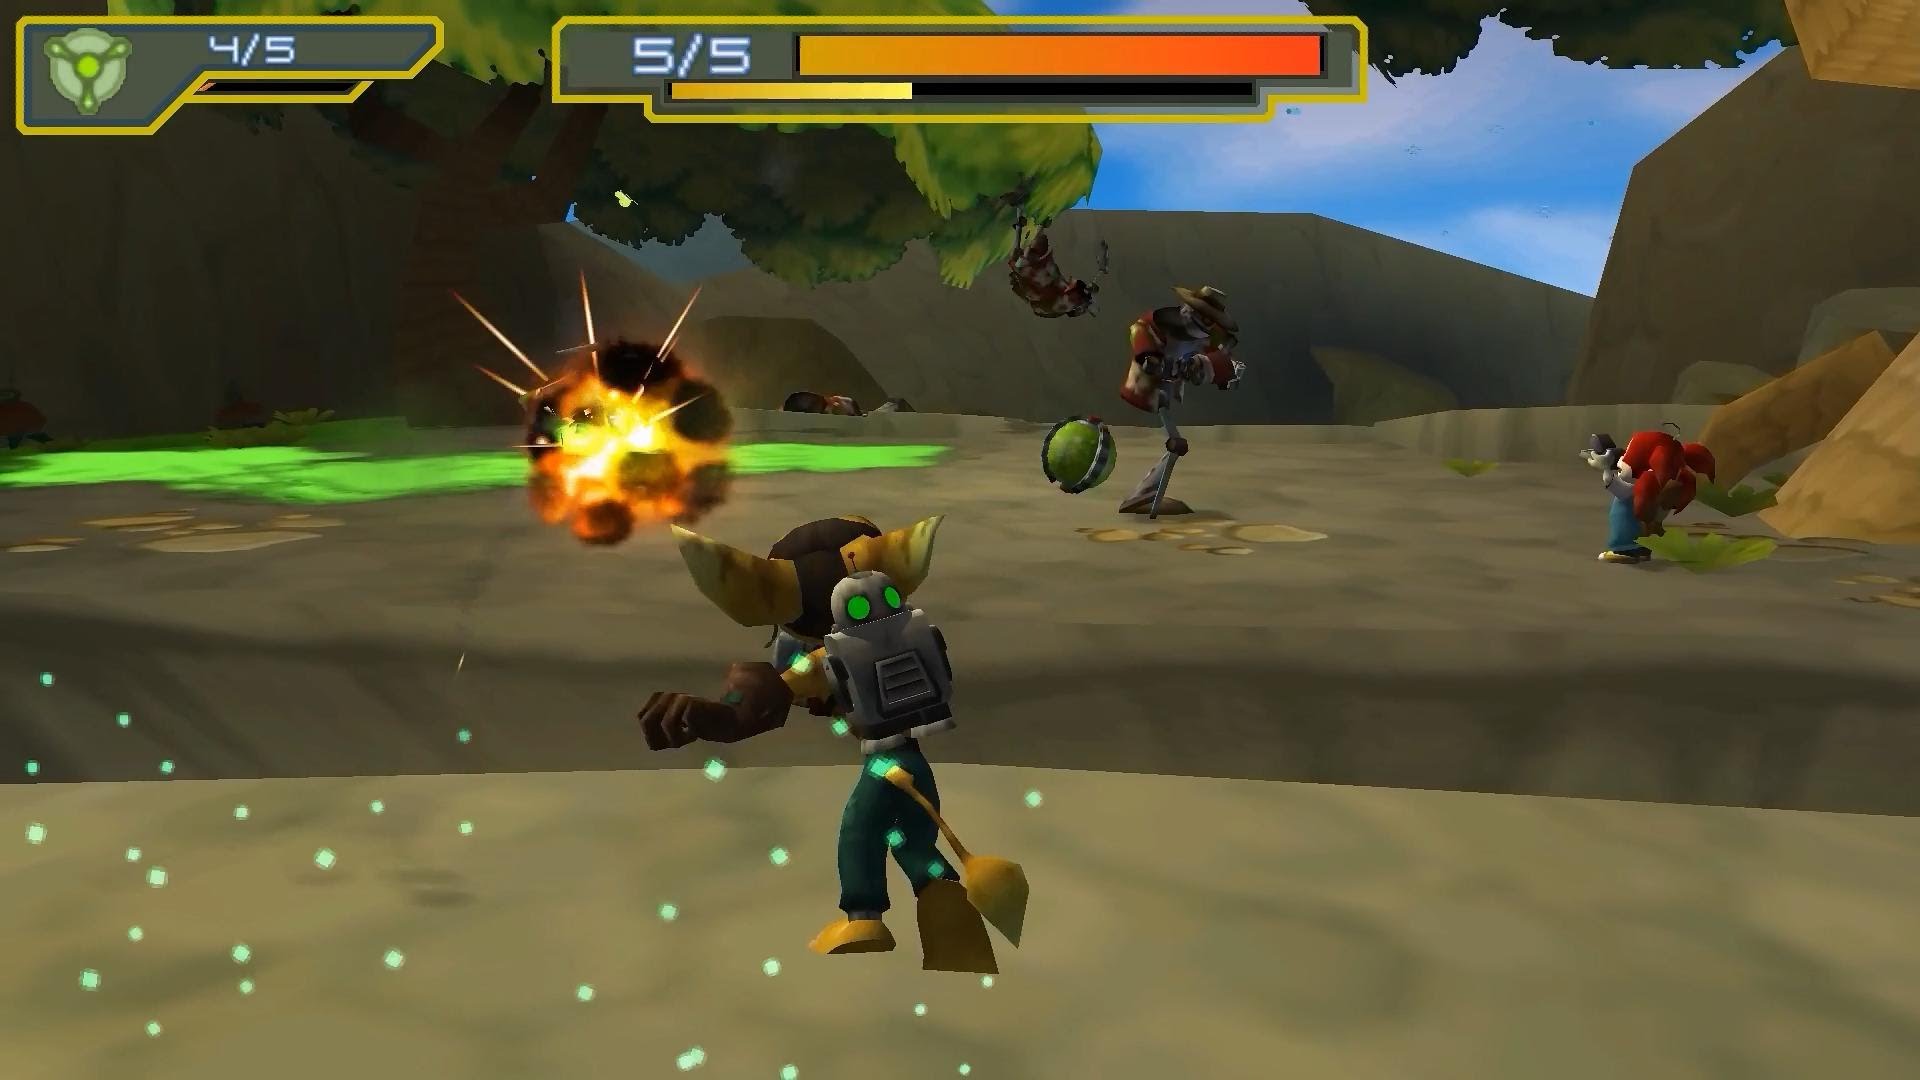 ratchet and clank ps2 mac emulator